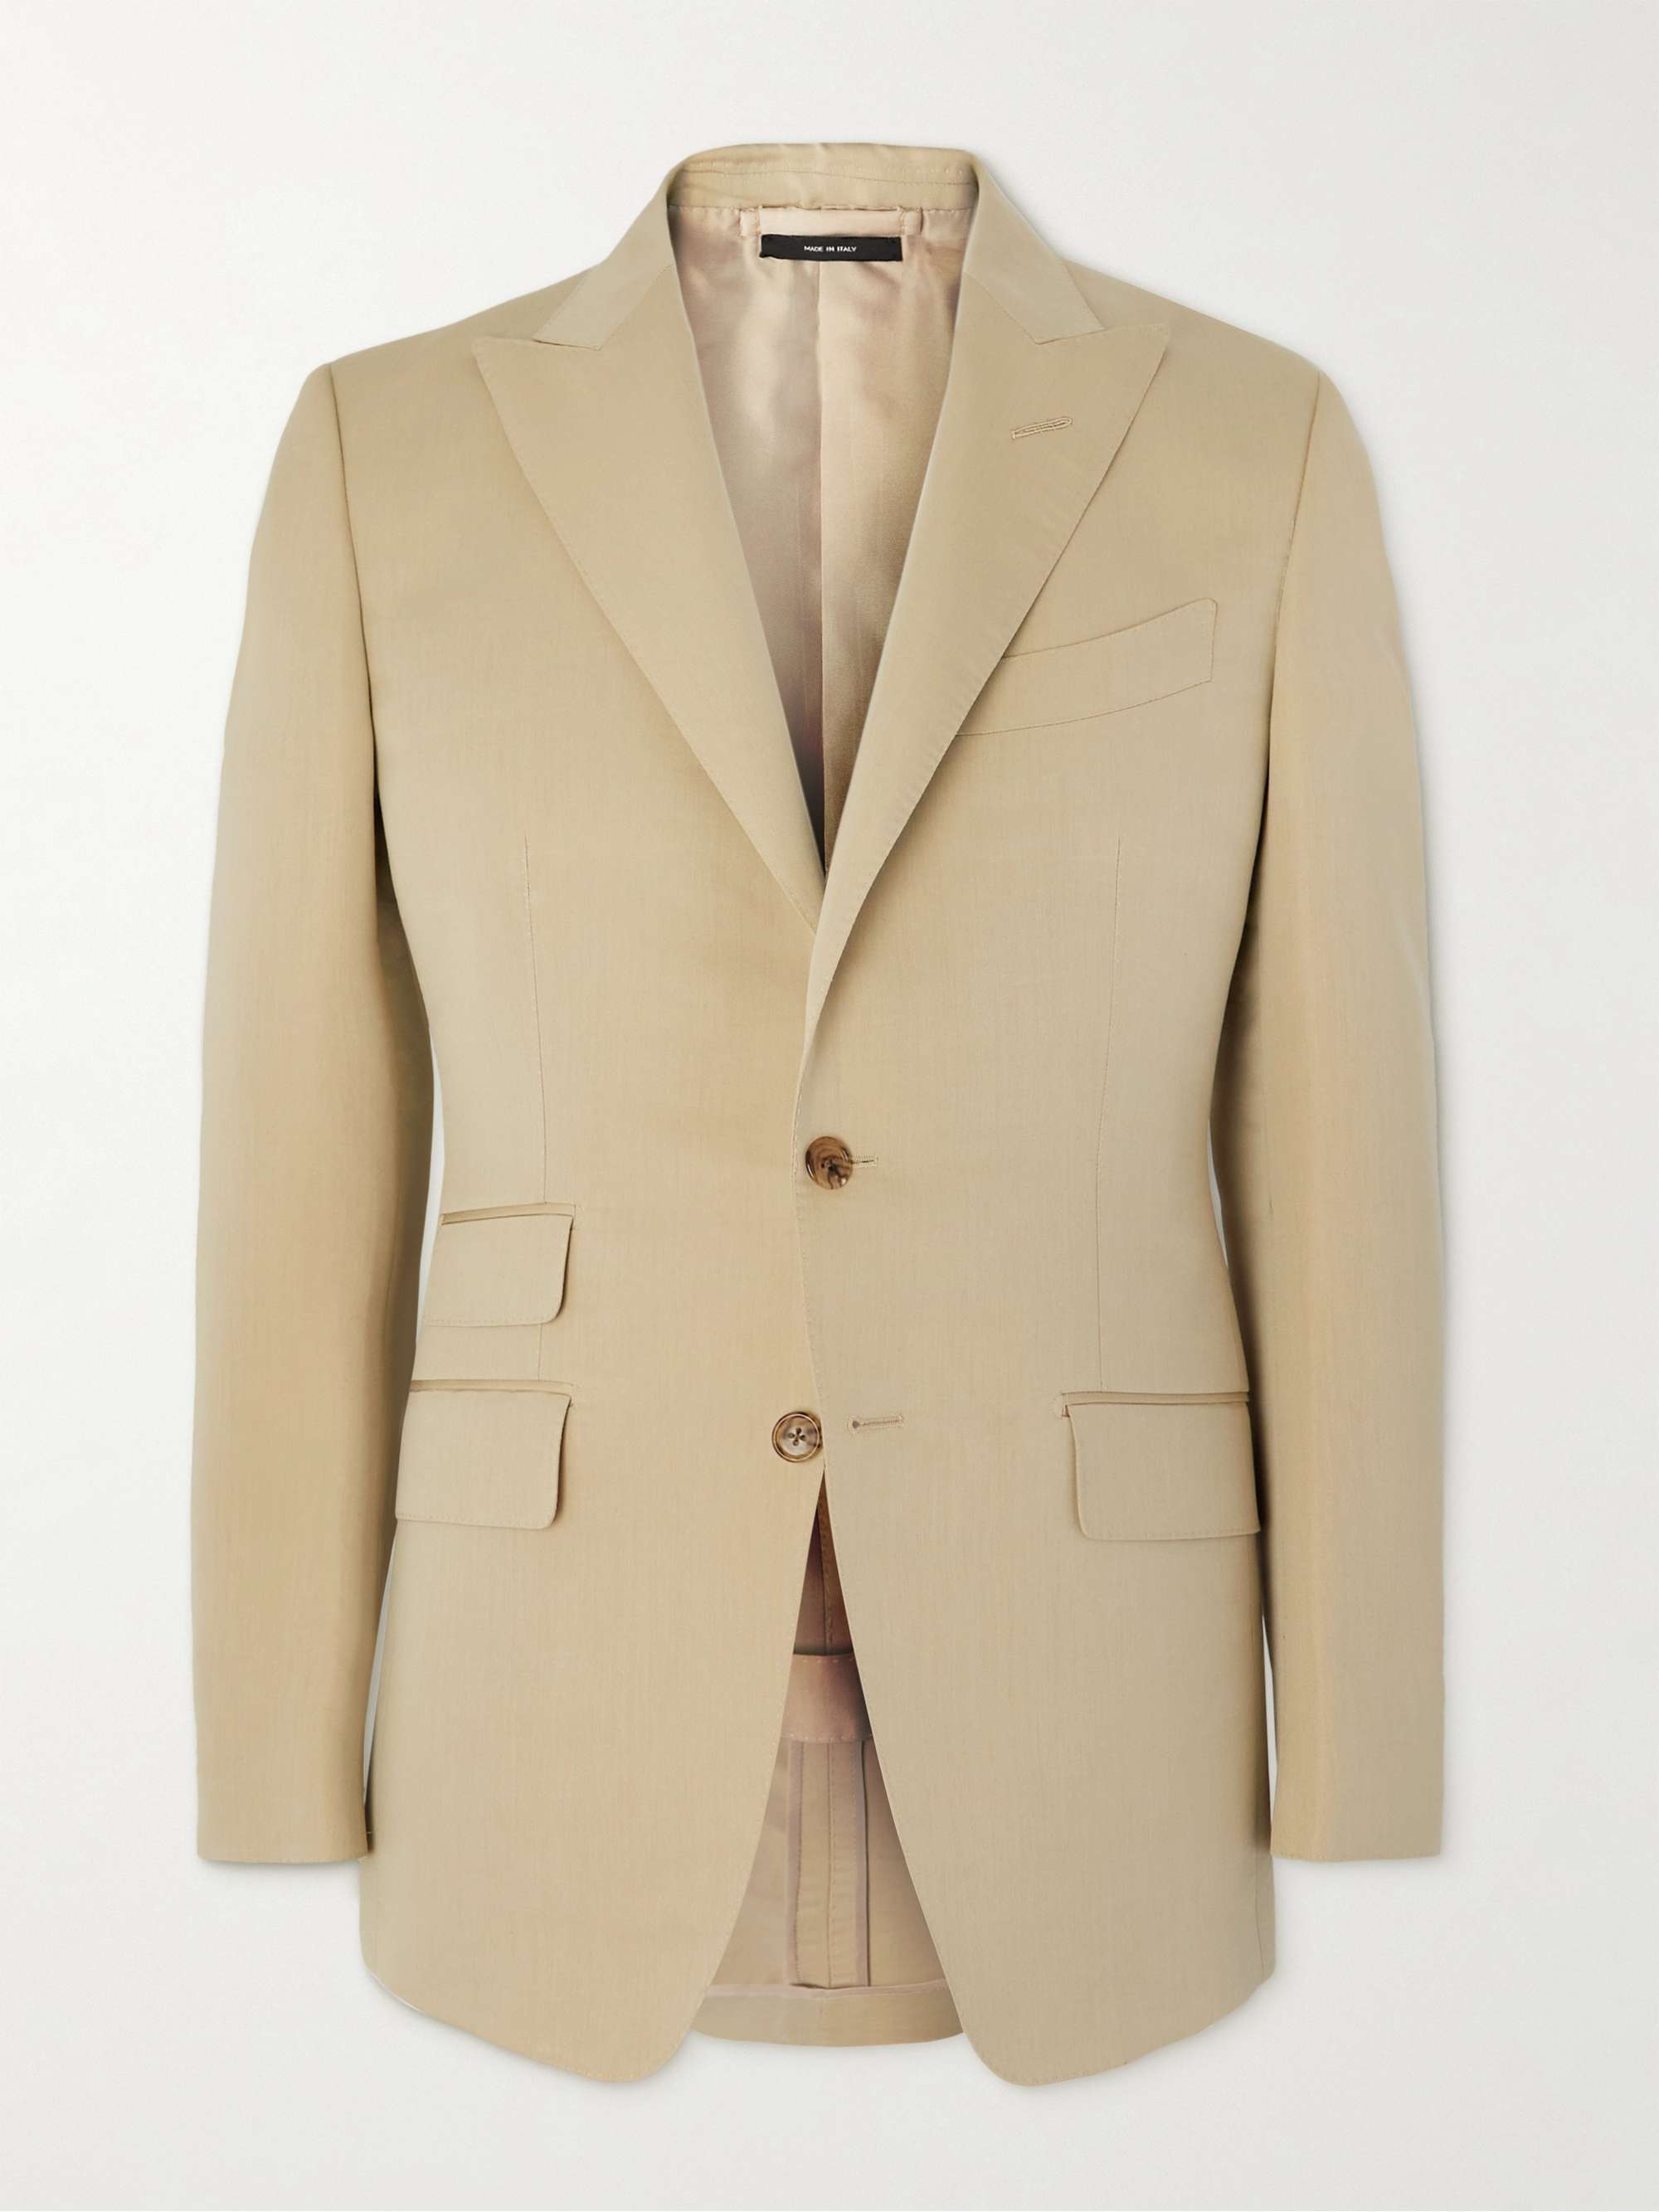 TOM FORD O'Connor Slim-Fit Cotton and Silk-Blend Suit Jacket